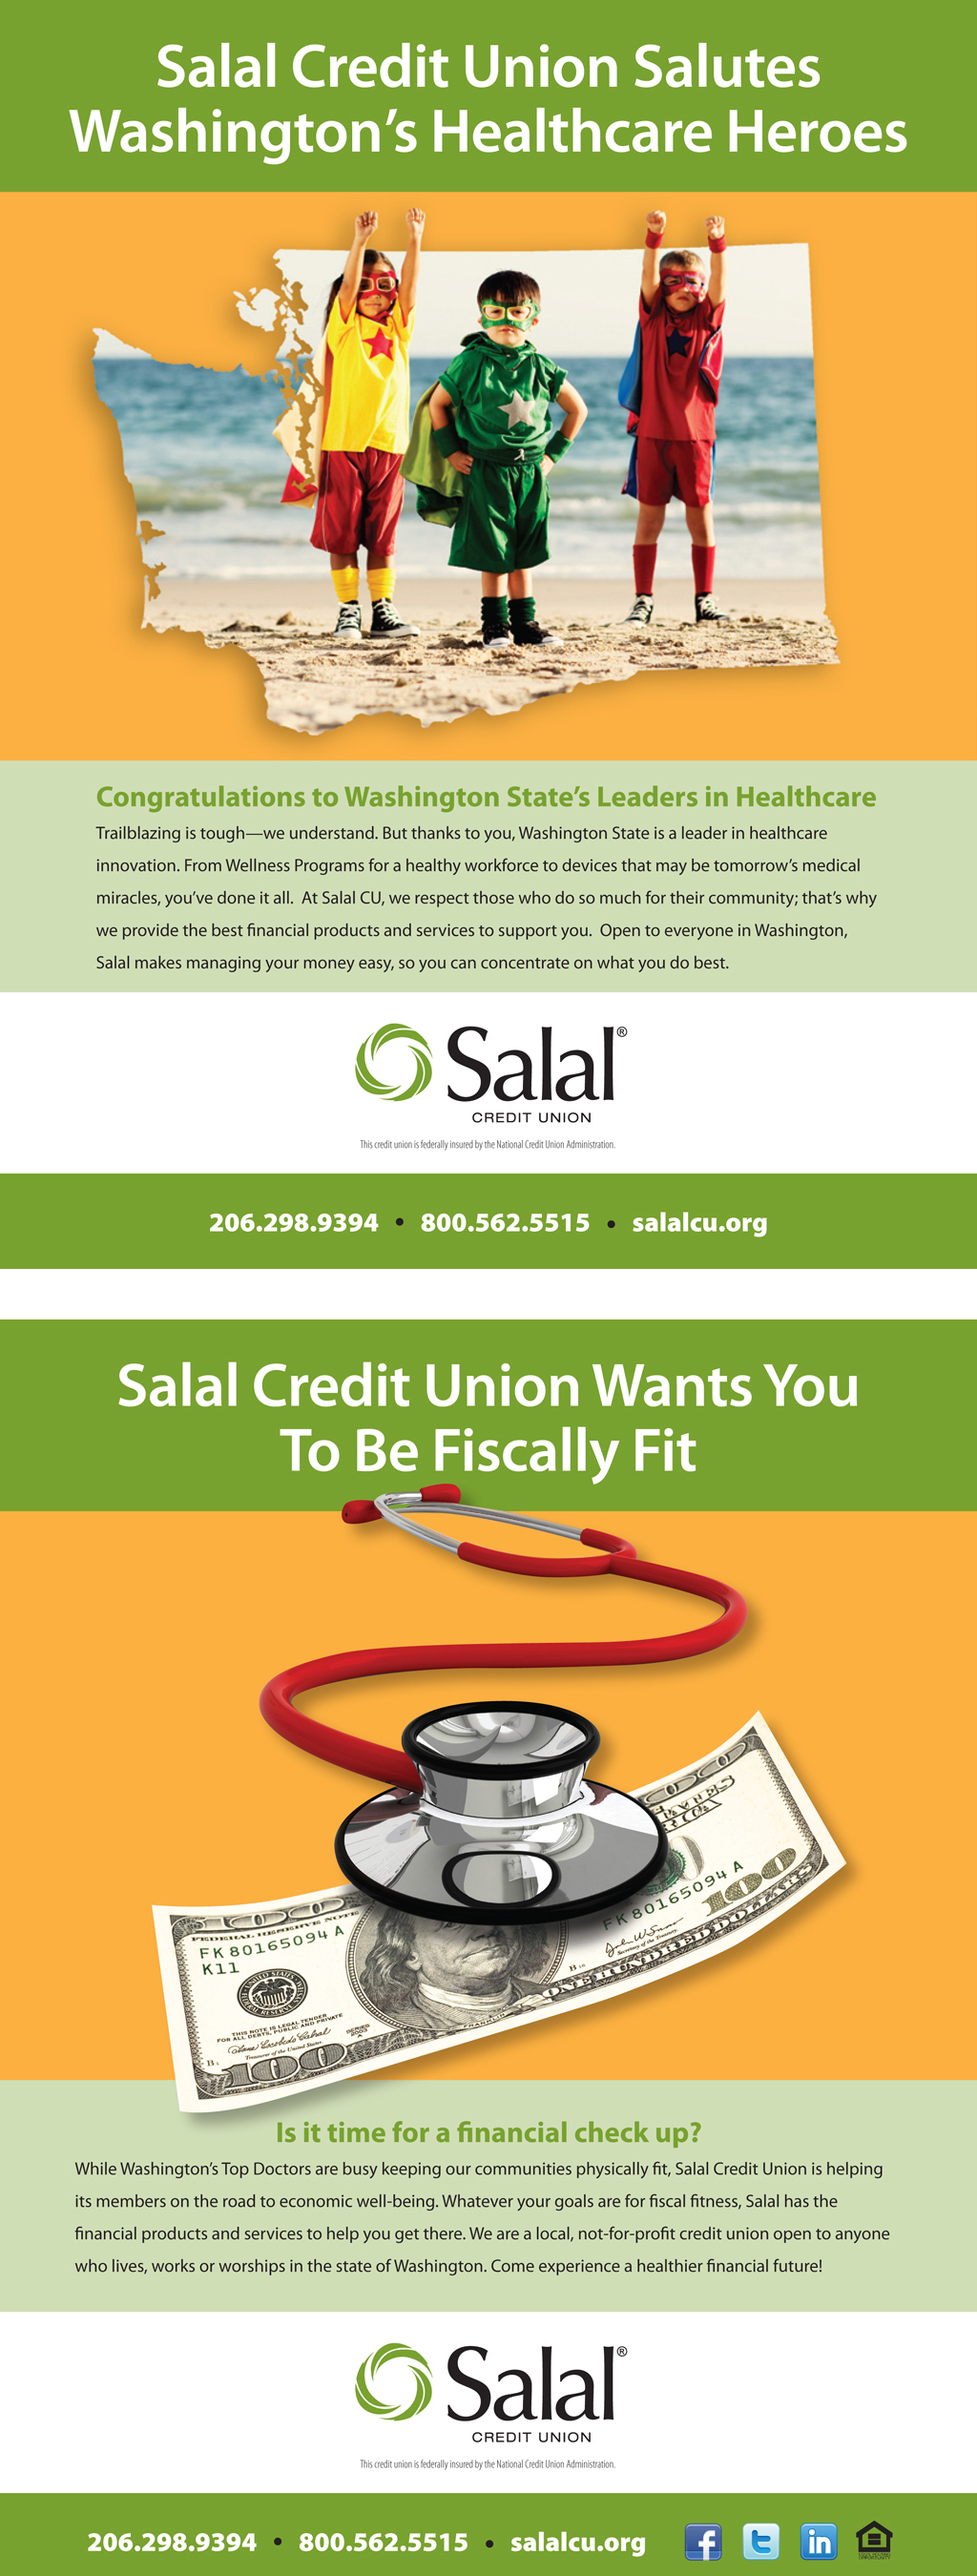 Ads appearing in Seattle Magazine promoting Salal Credit Union offerings for health care workers